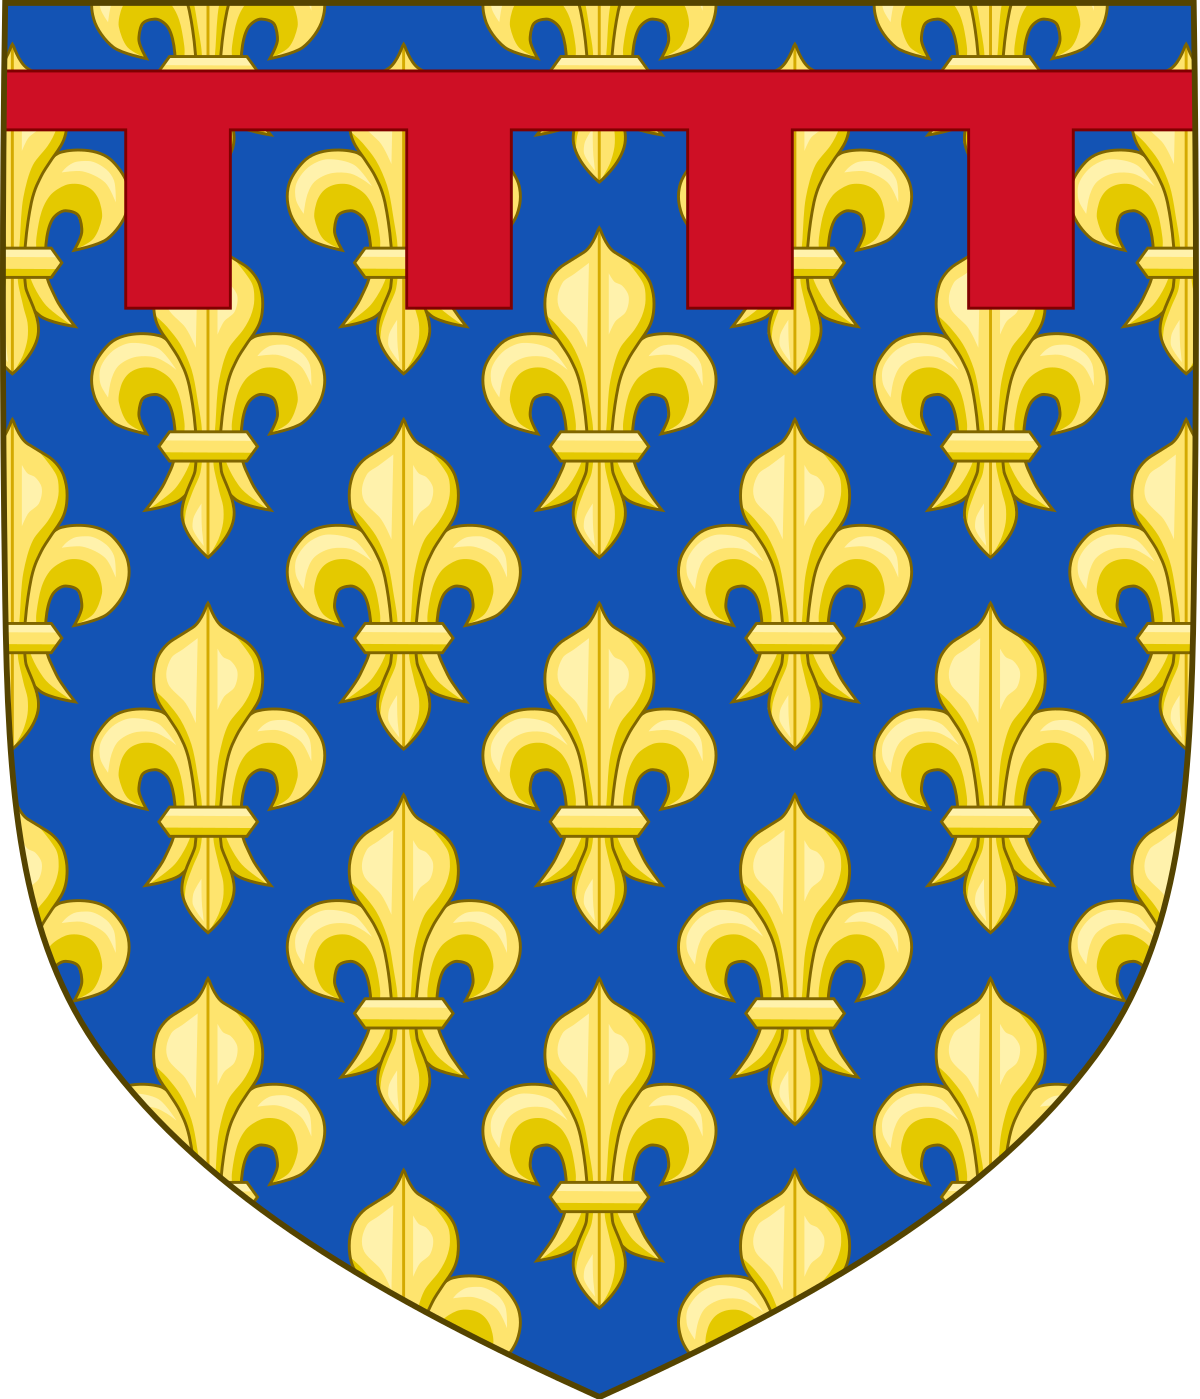 1200px-coat_of_arms_of_charles_i_of_anjou_after_1246_lambel_of_four_points_svg.png